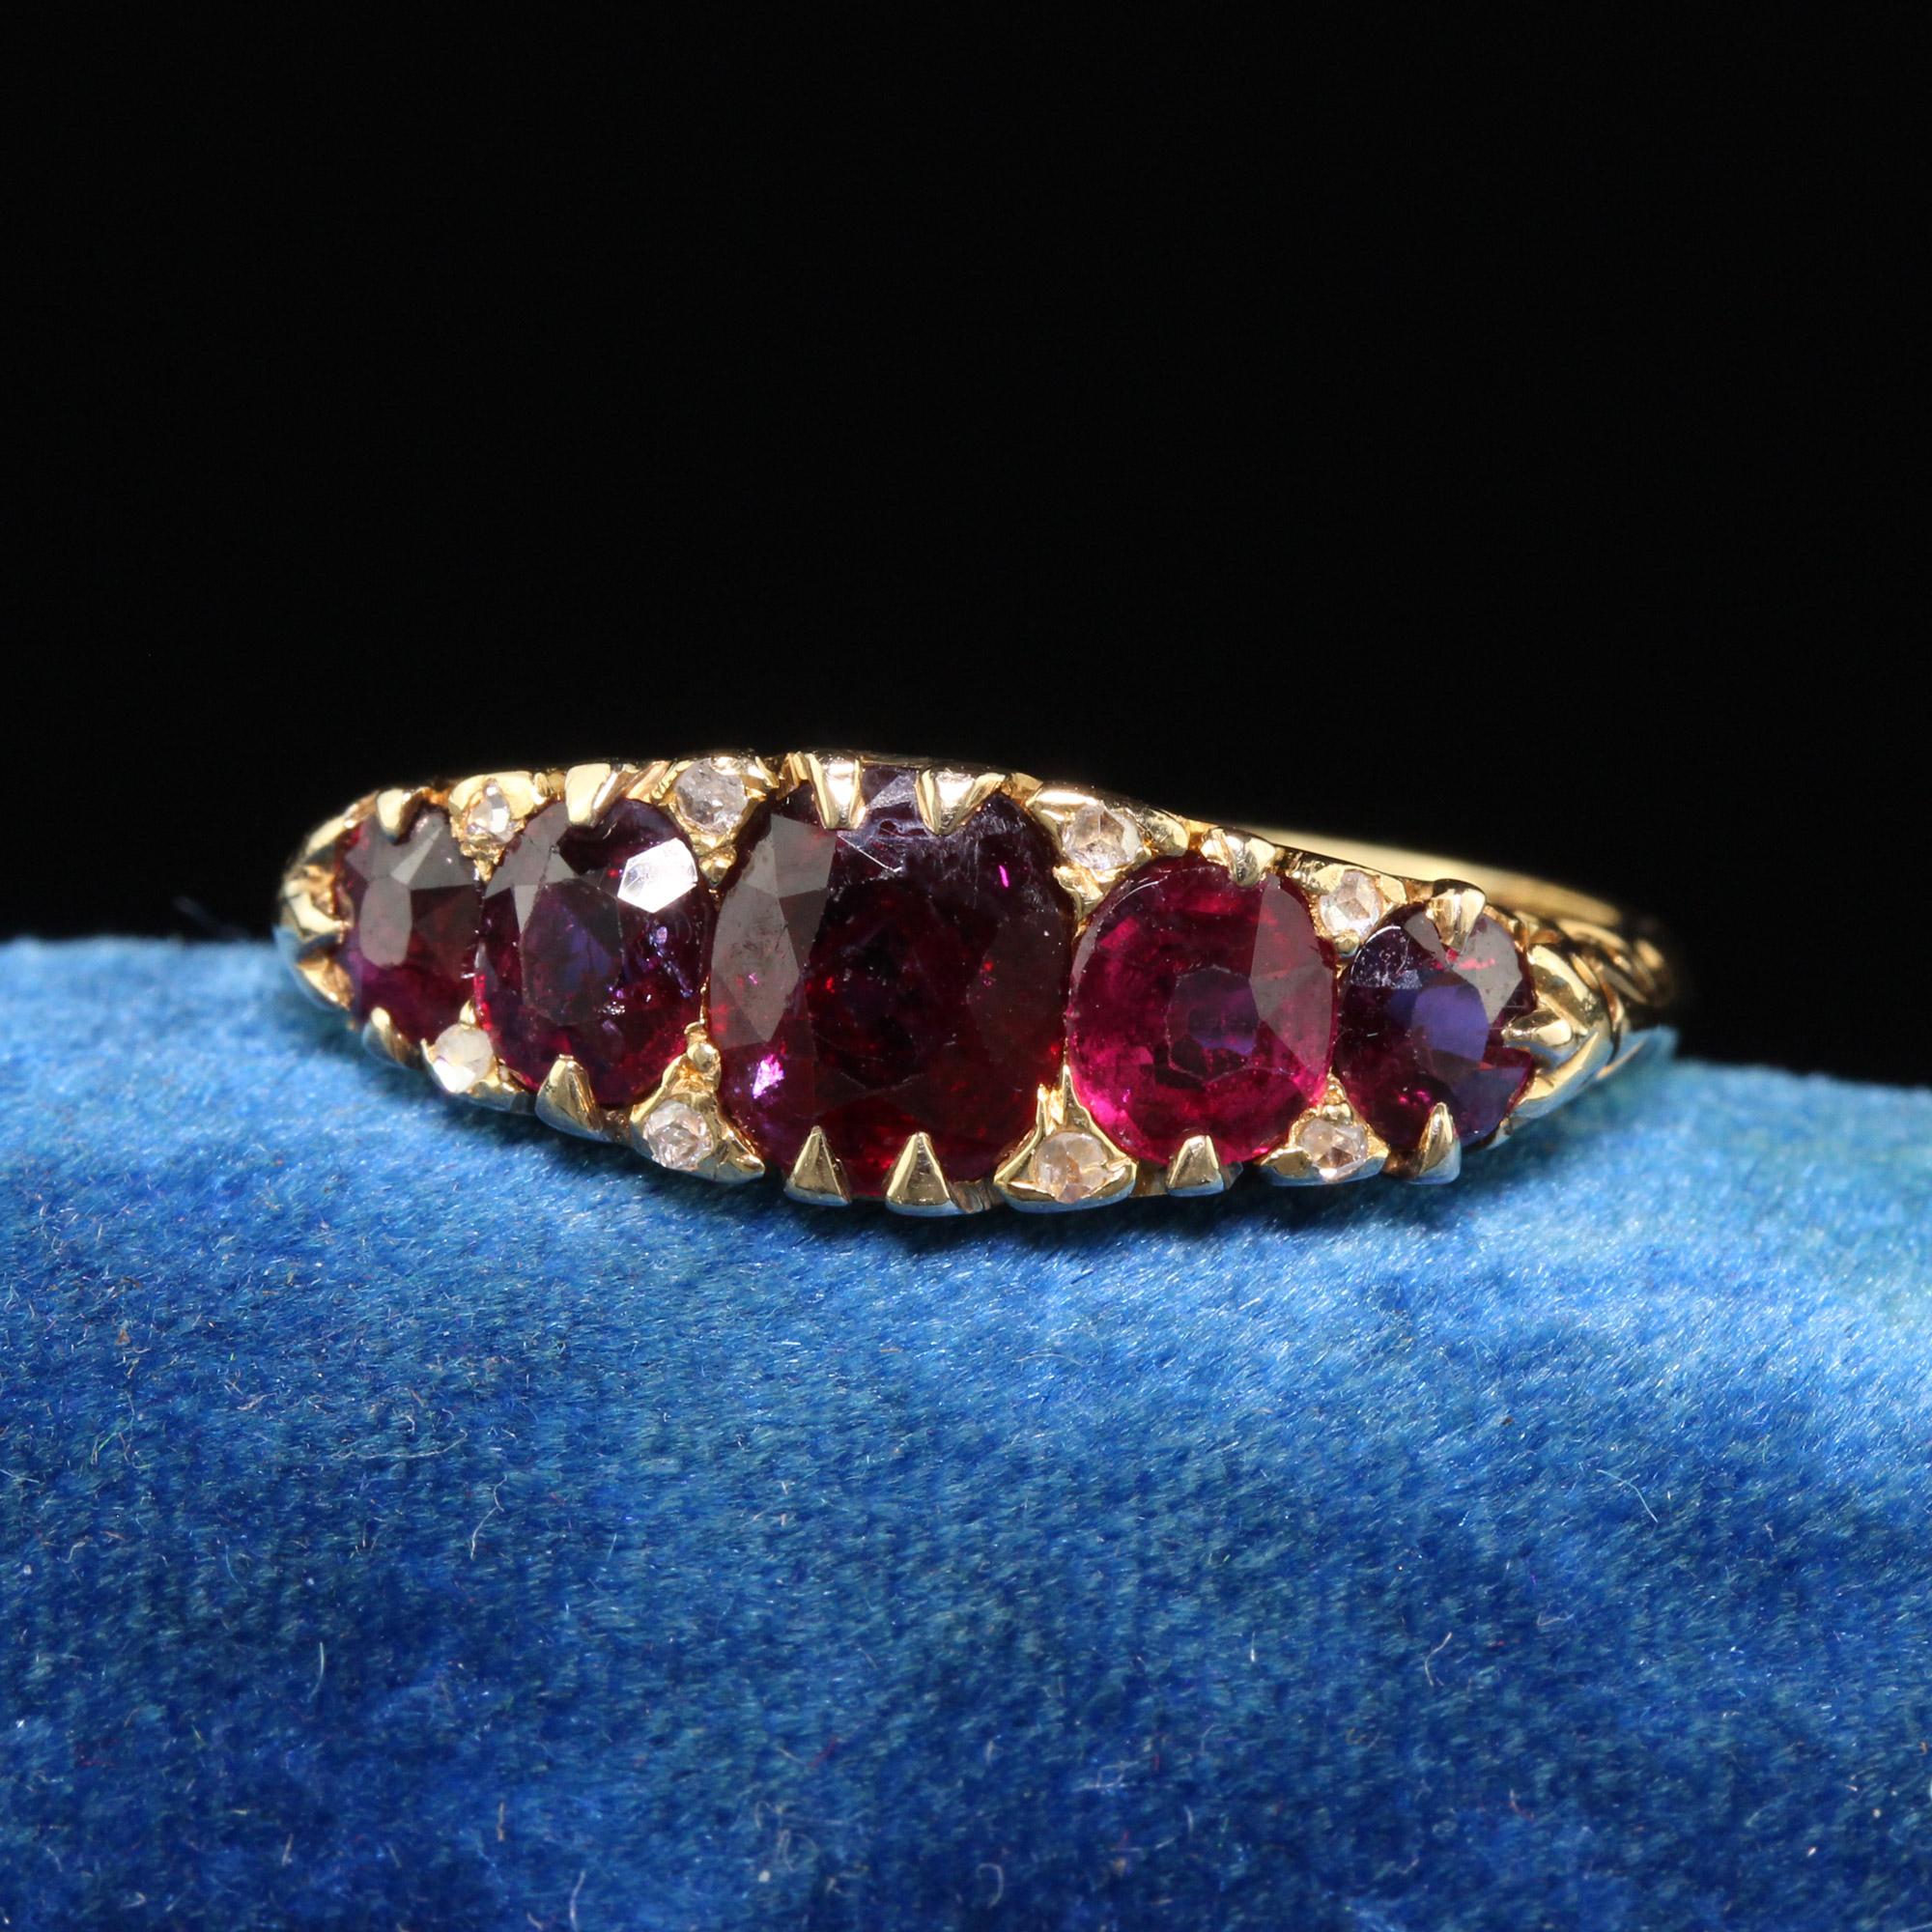 Beautiful Antique Victorian 18K Yellow Gold Natural Ruby and Diamond Five Stone Band - GIA. This gorgeous band is crafted in 18k yellow Gold. The center holds 5 natural rubies and it comes with a GIA report. There are very small diamonds in between